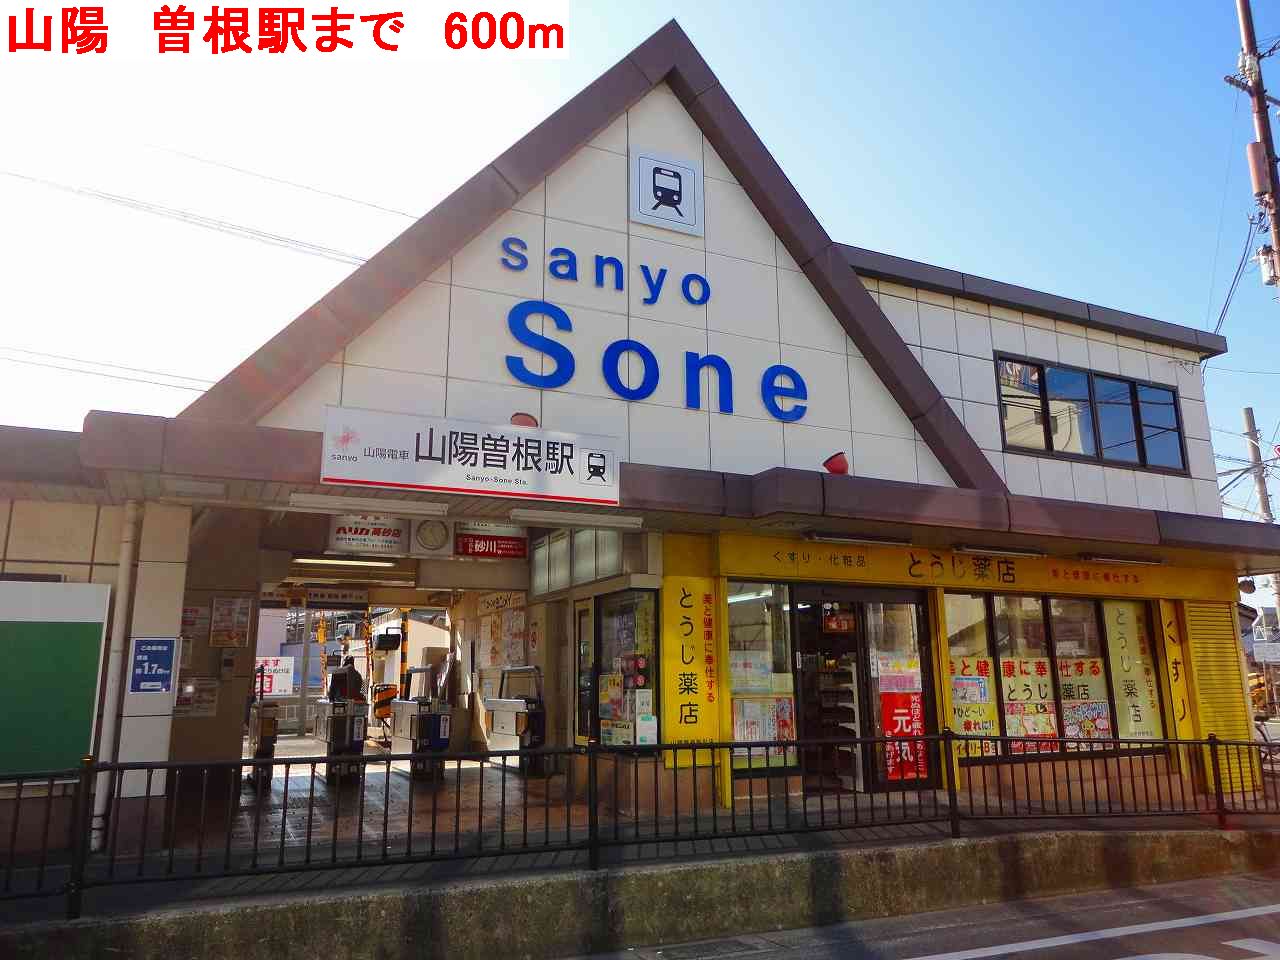 Other. 600m to Sanyo Sone Station (Other)